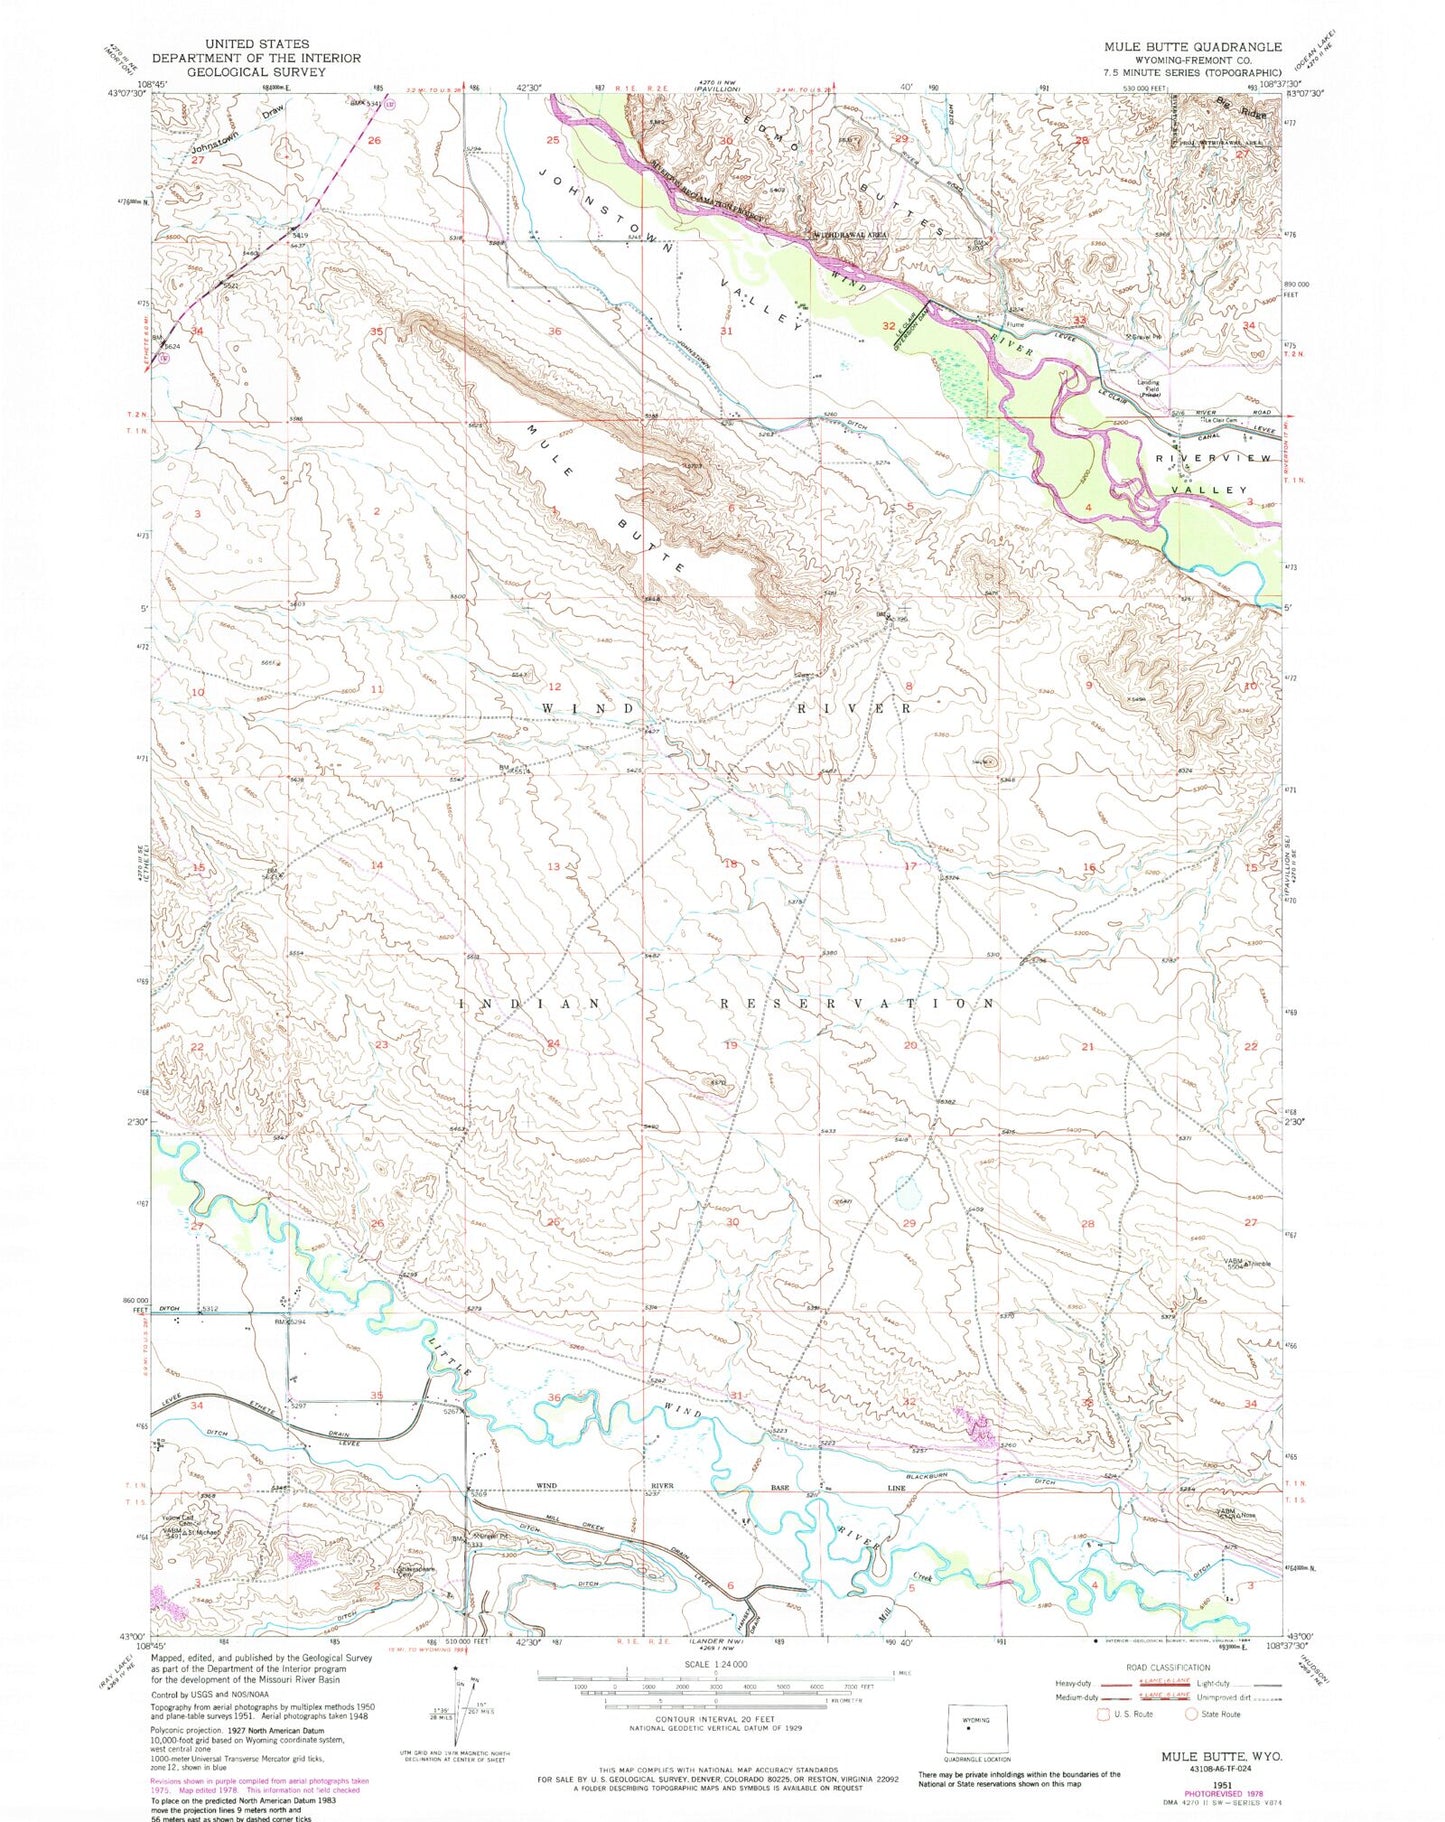 Classic USGS Mule Butte Wyoming 7.5'x7.5' Topo Map Image